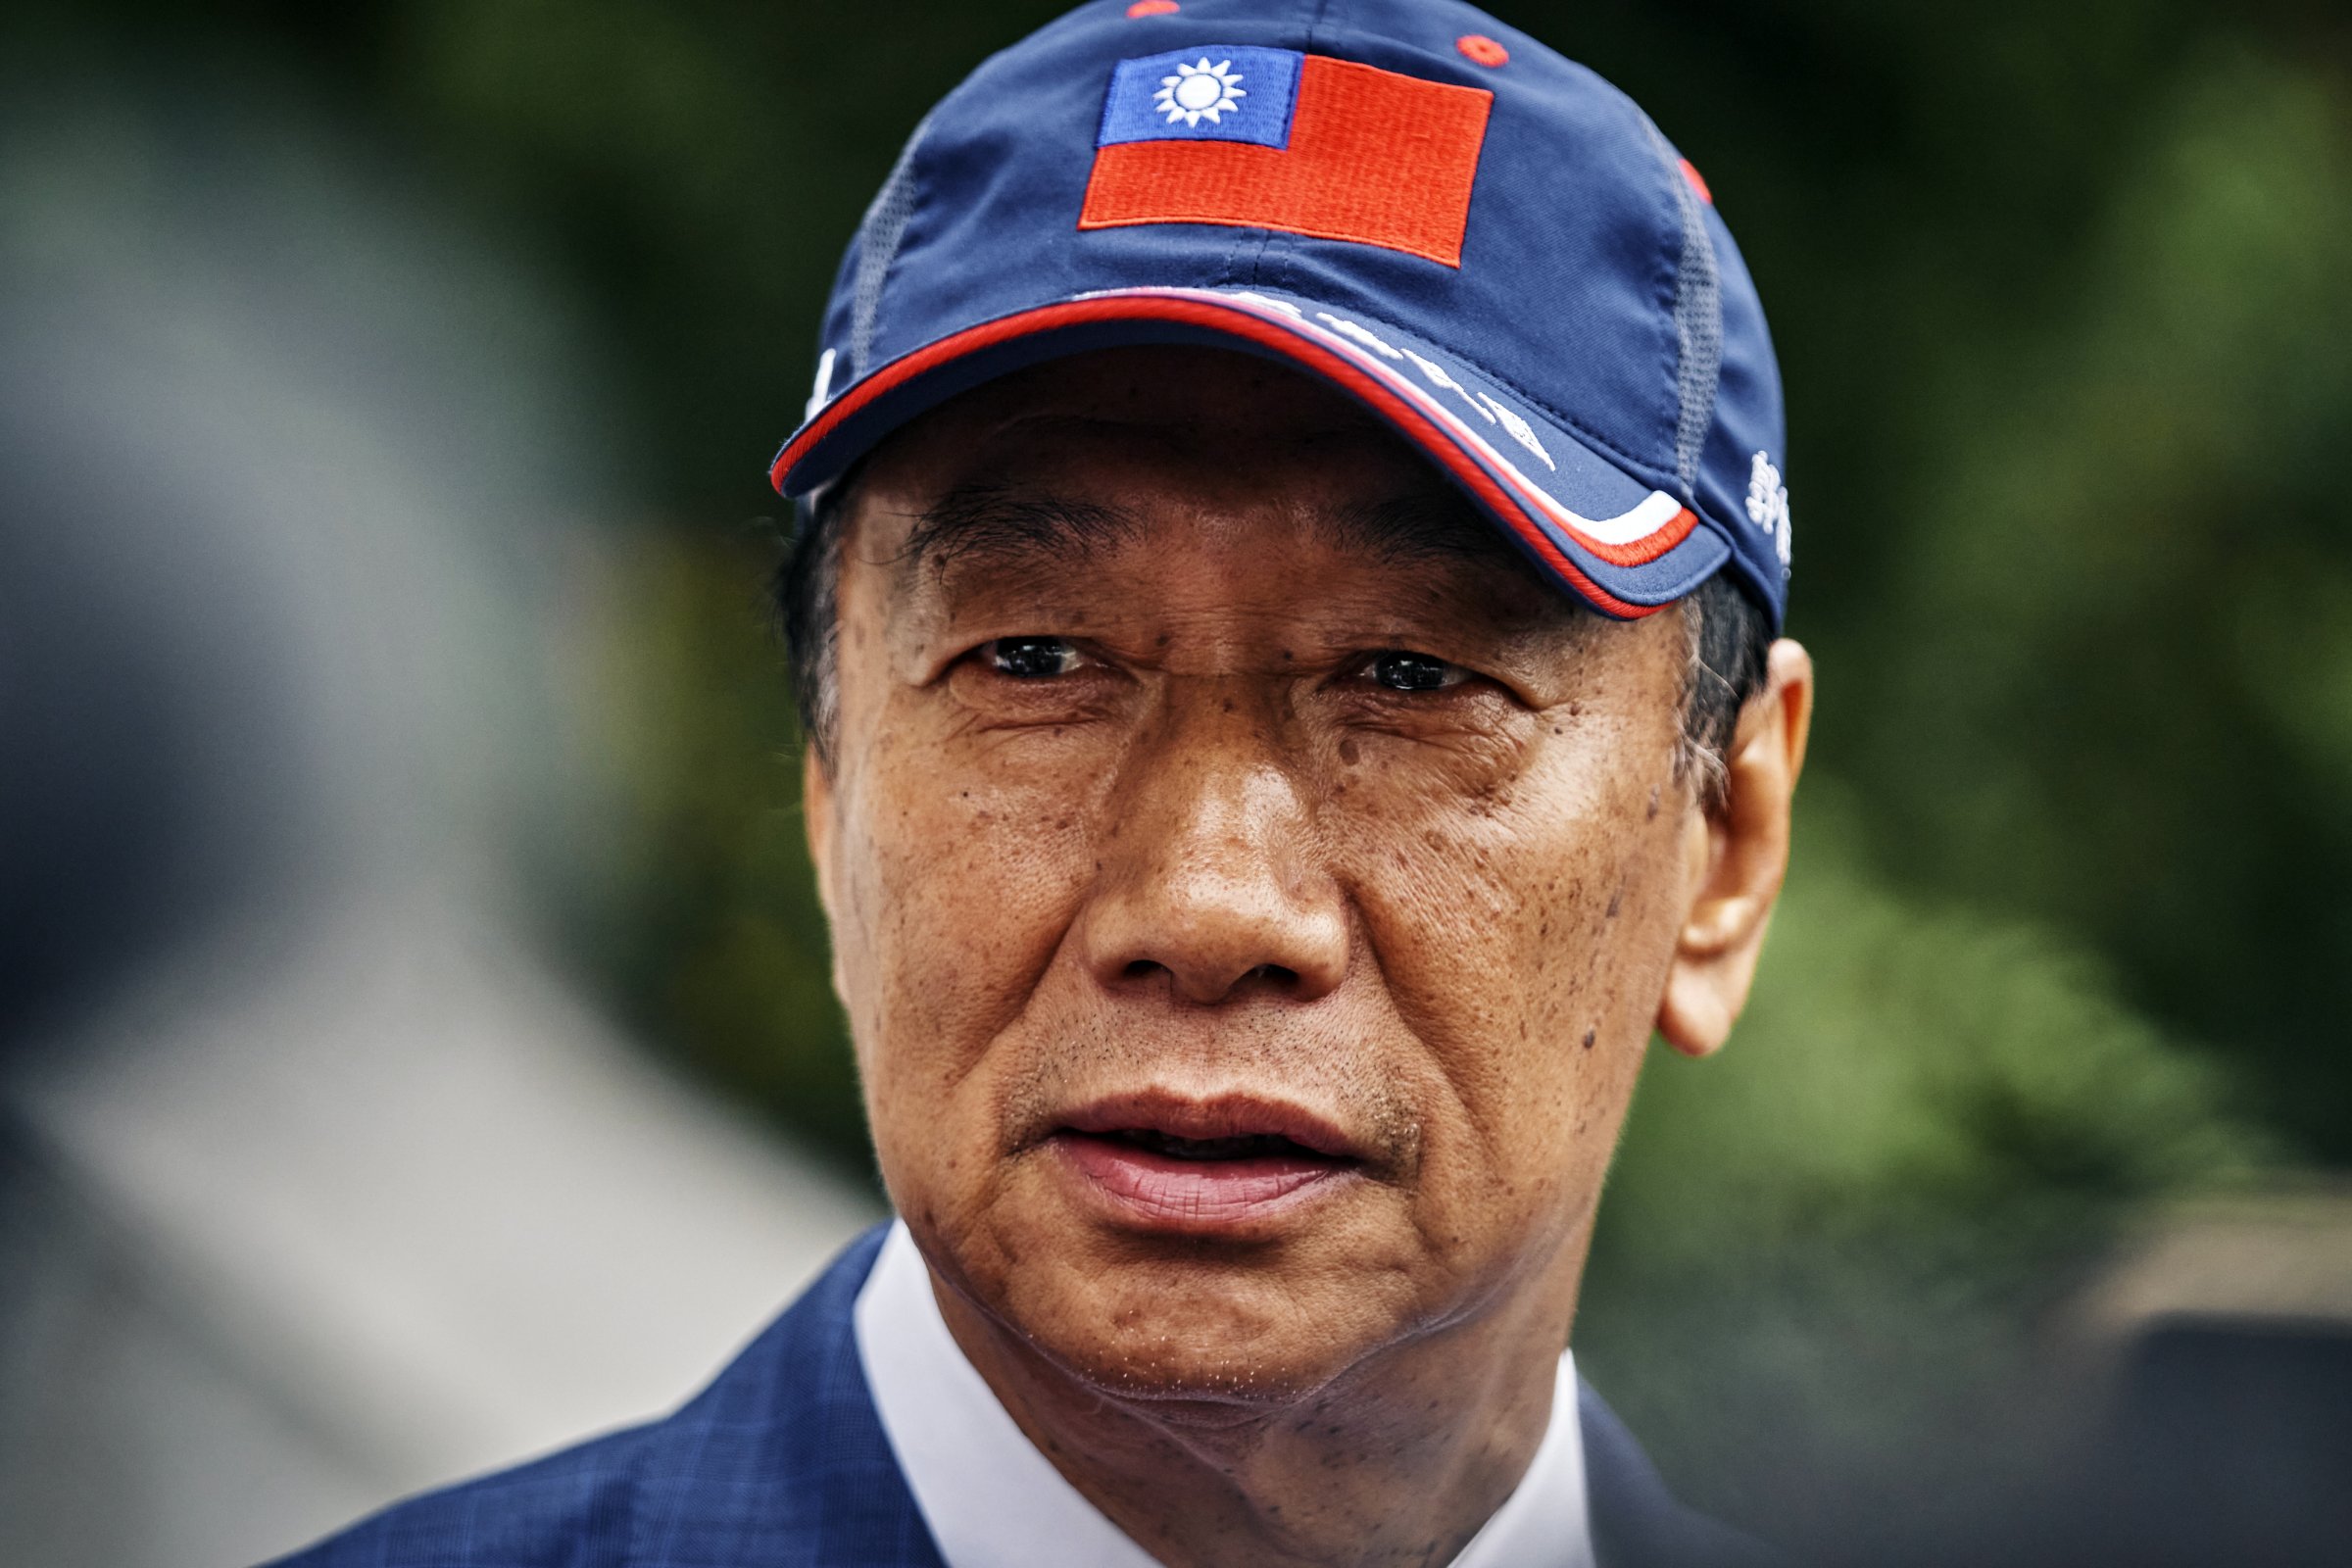 Foxconn Founder Terry Gou Attends Event in Kinmen